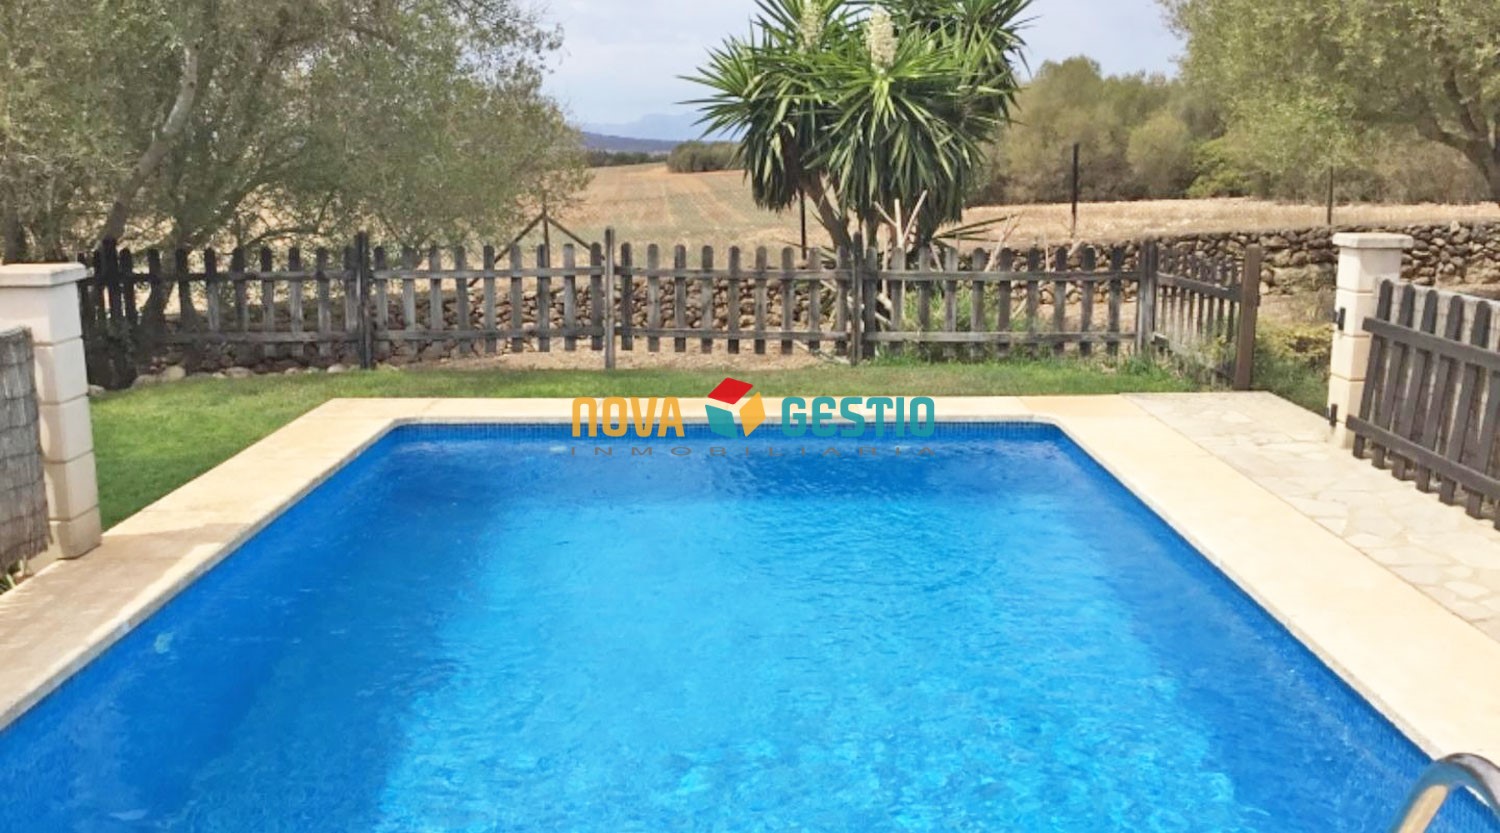 Rustic property for rent Manacor : : FR1110MA-AEN